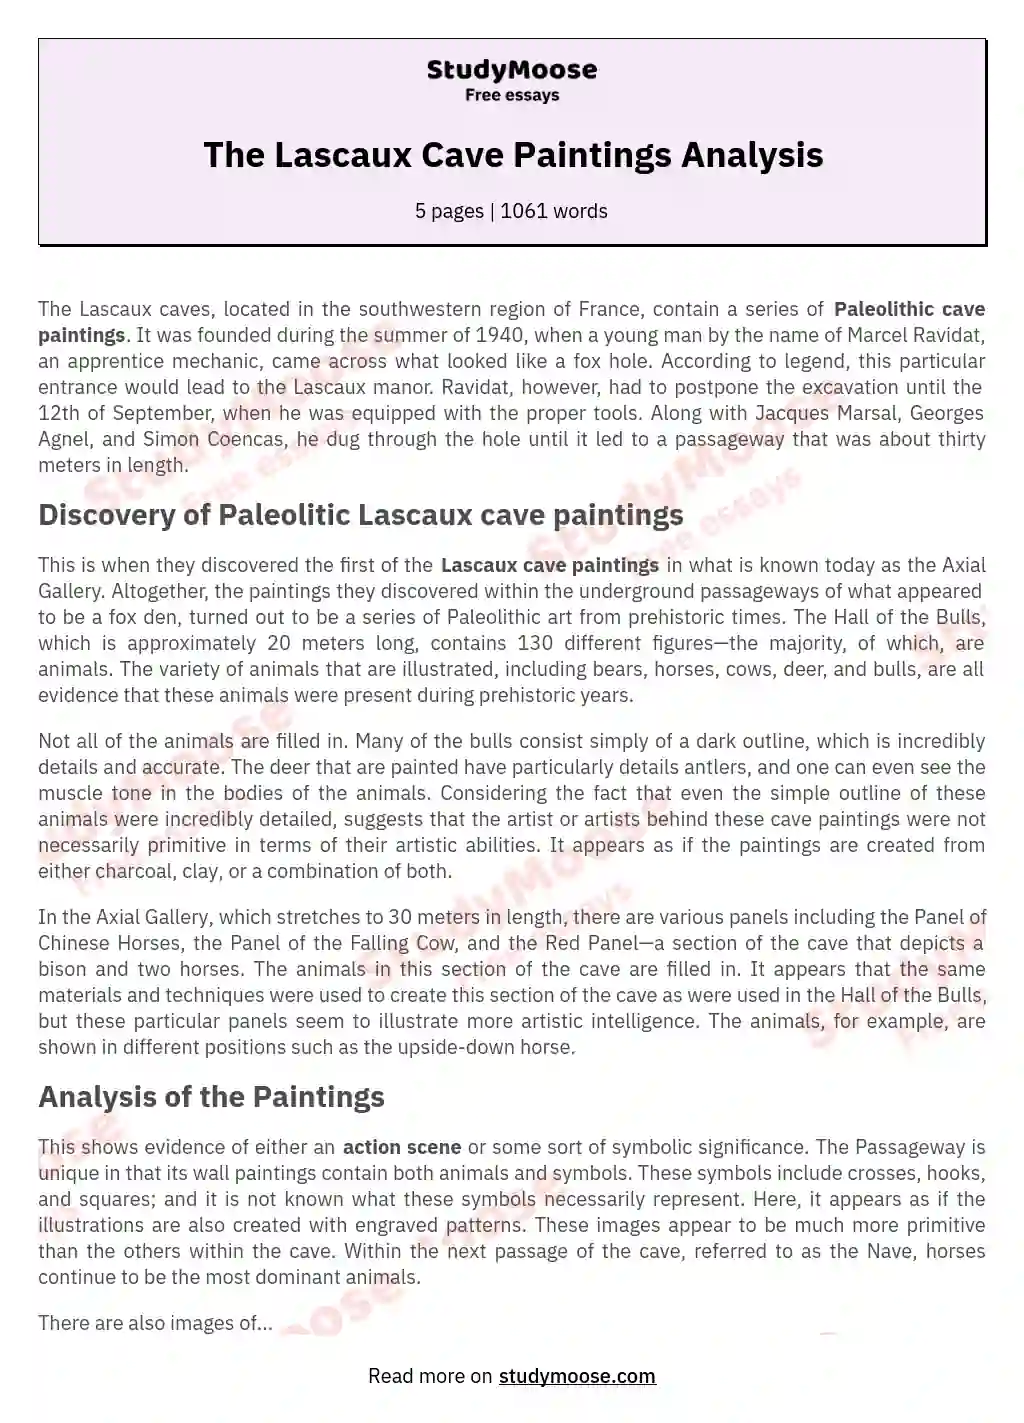 The Lascaux Cave Paintings Analysis